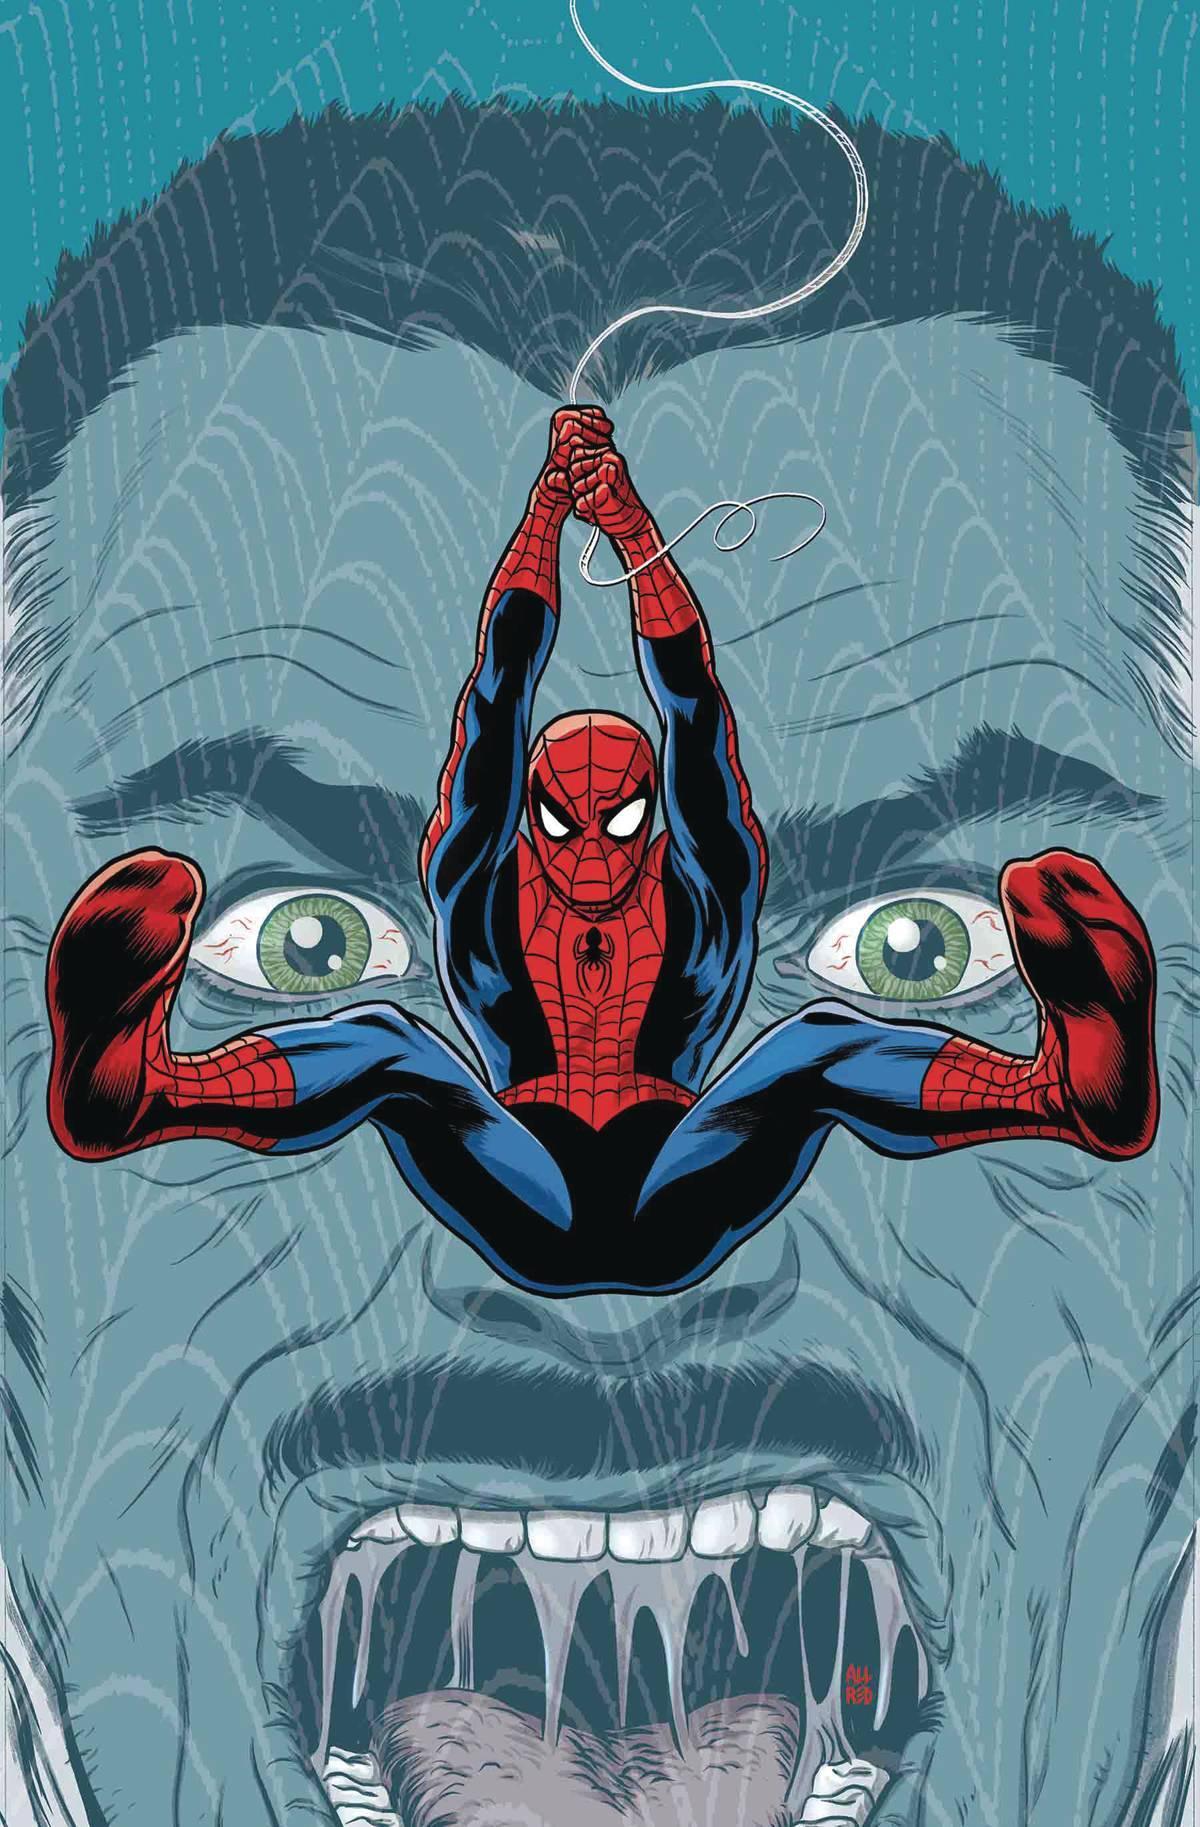 PETER PARKER SPECTACULAR SPIDER-MAN ANNUAL #1 - Kings Comics